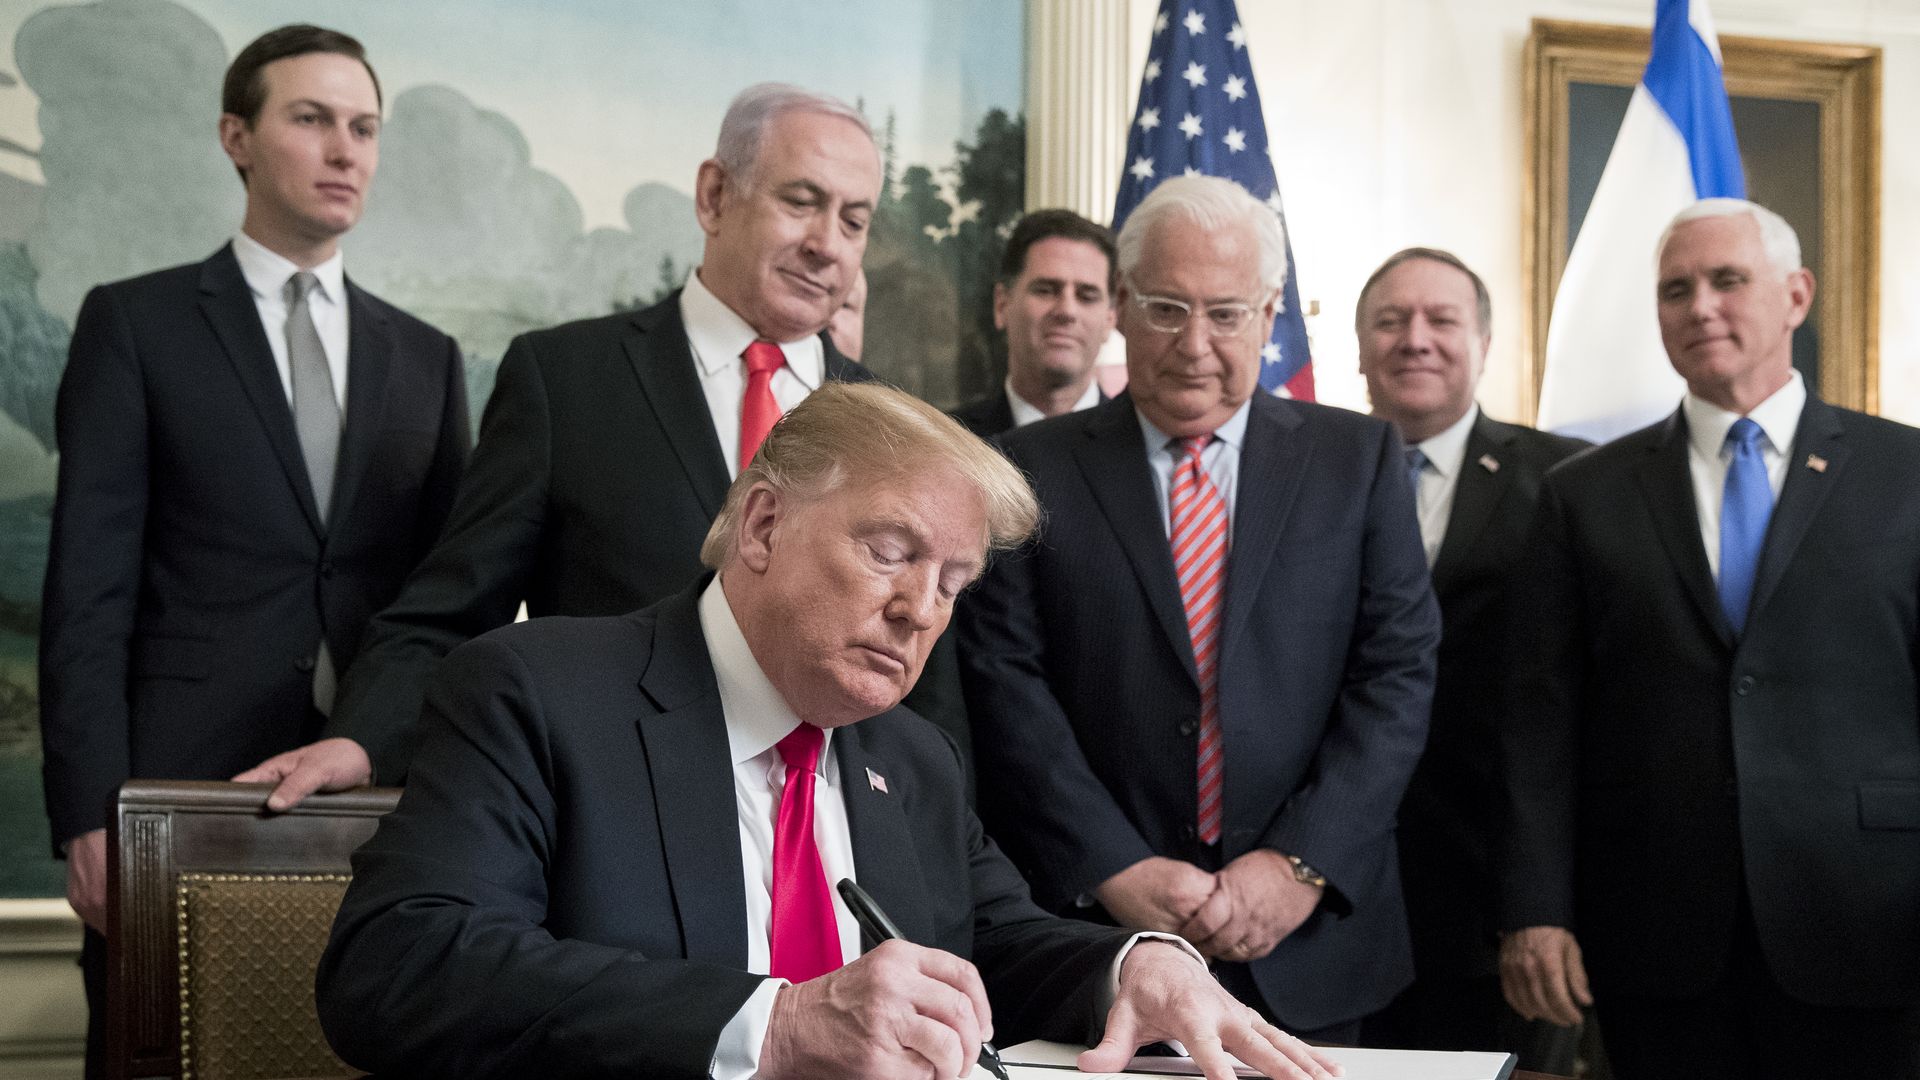 Trump signs an order recognizing Golan Heights as Israeli territory. Photo: Michael Reynolds - Pool/Getty Images